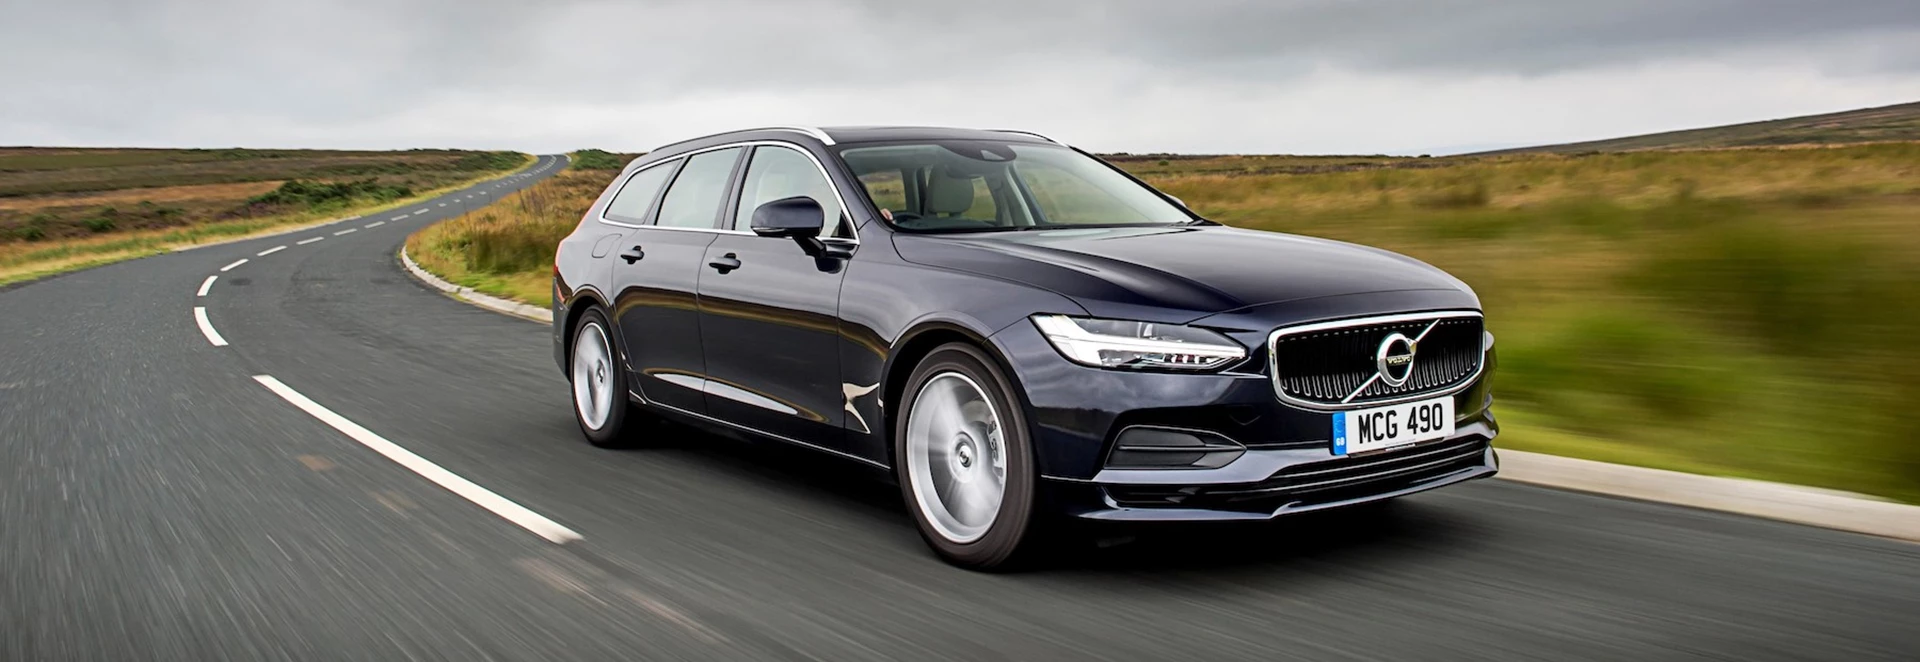 5 reasons why the Volvo V90 is the dream estate car 